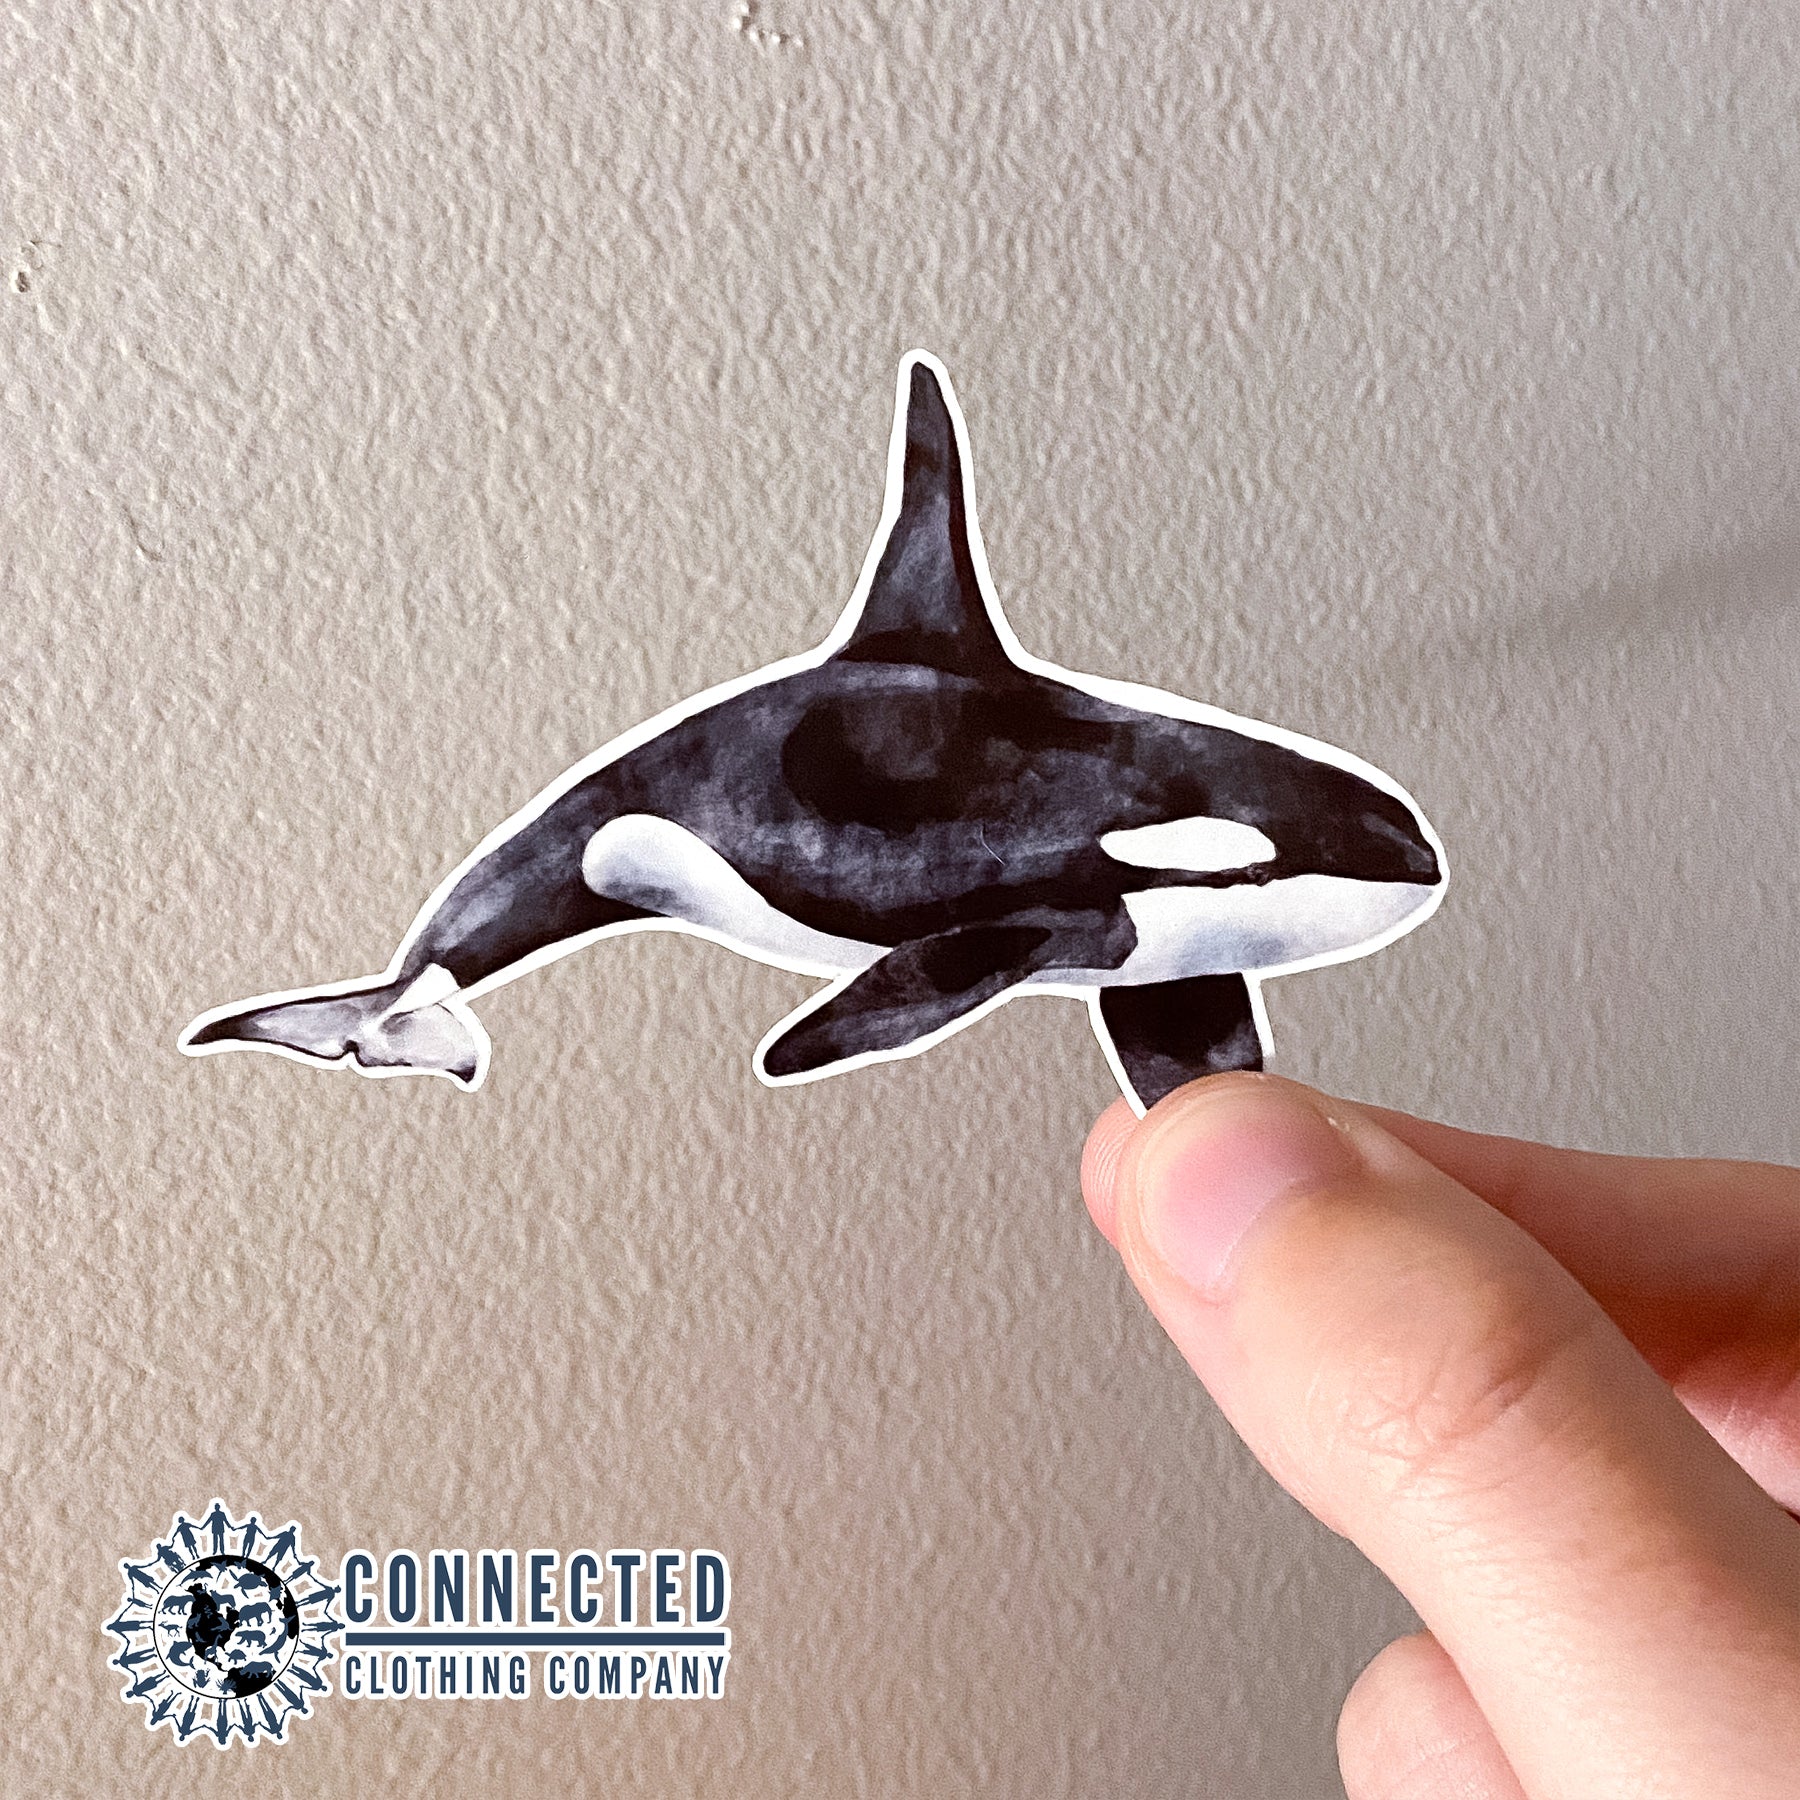 Orca Sticker - Connected Clothing Company - 10% of proceeds donated to Wild Orca nonprofit